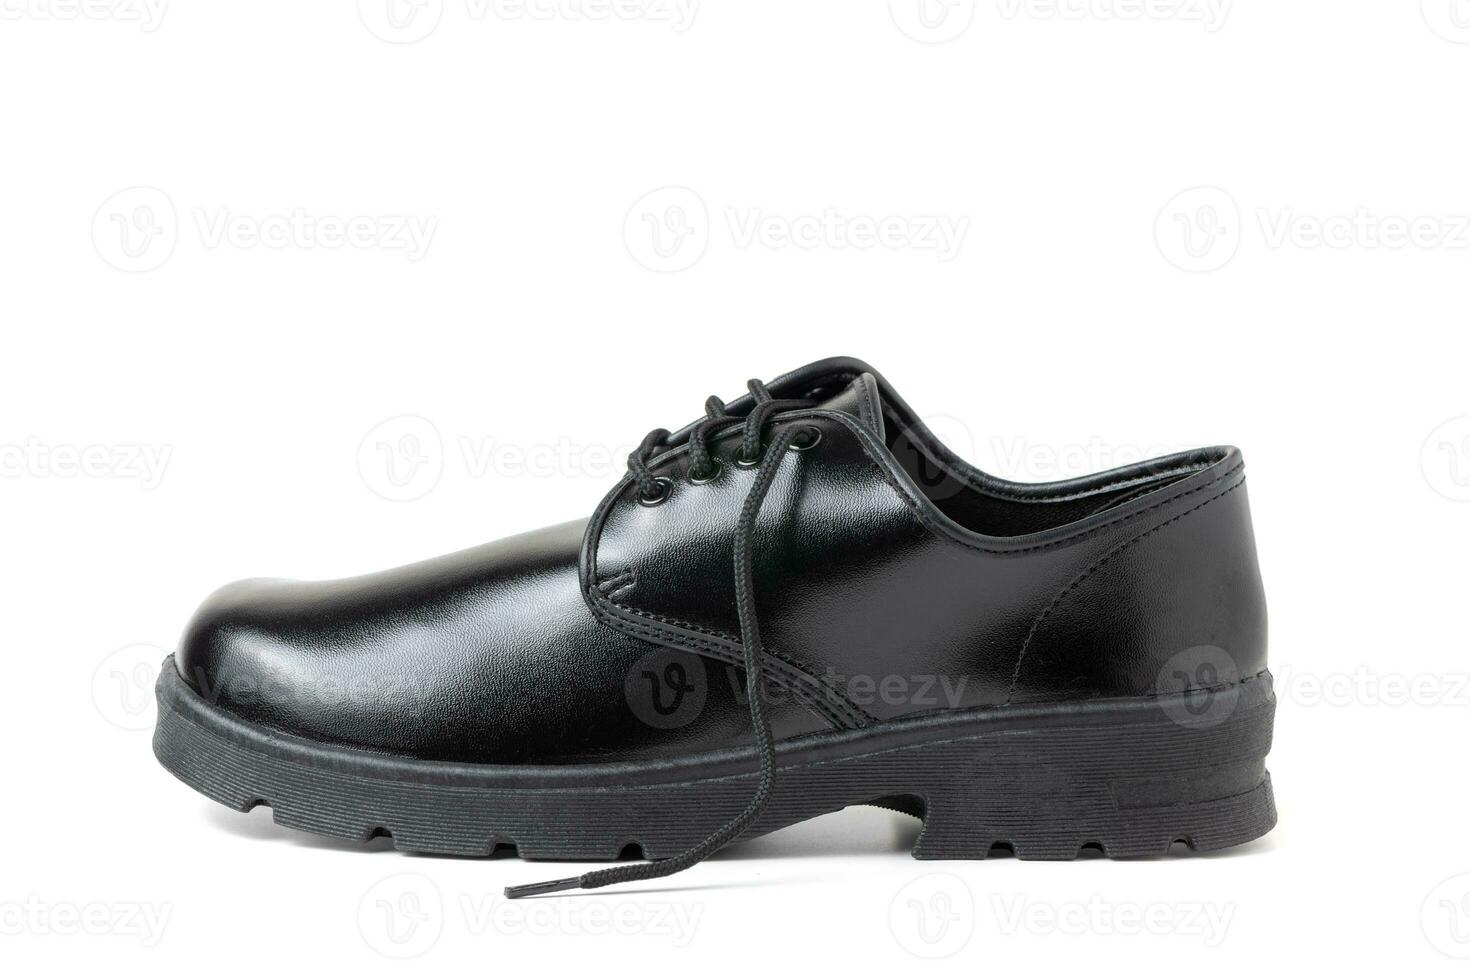 New leather boy student shoes isolated photo